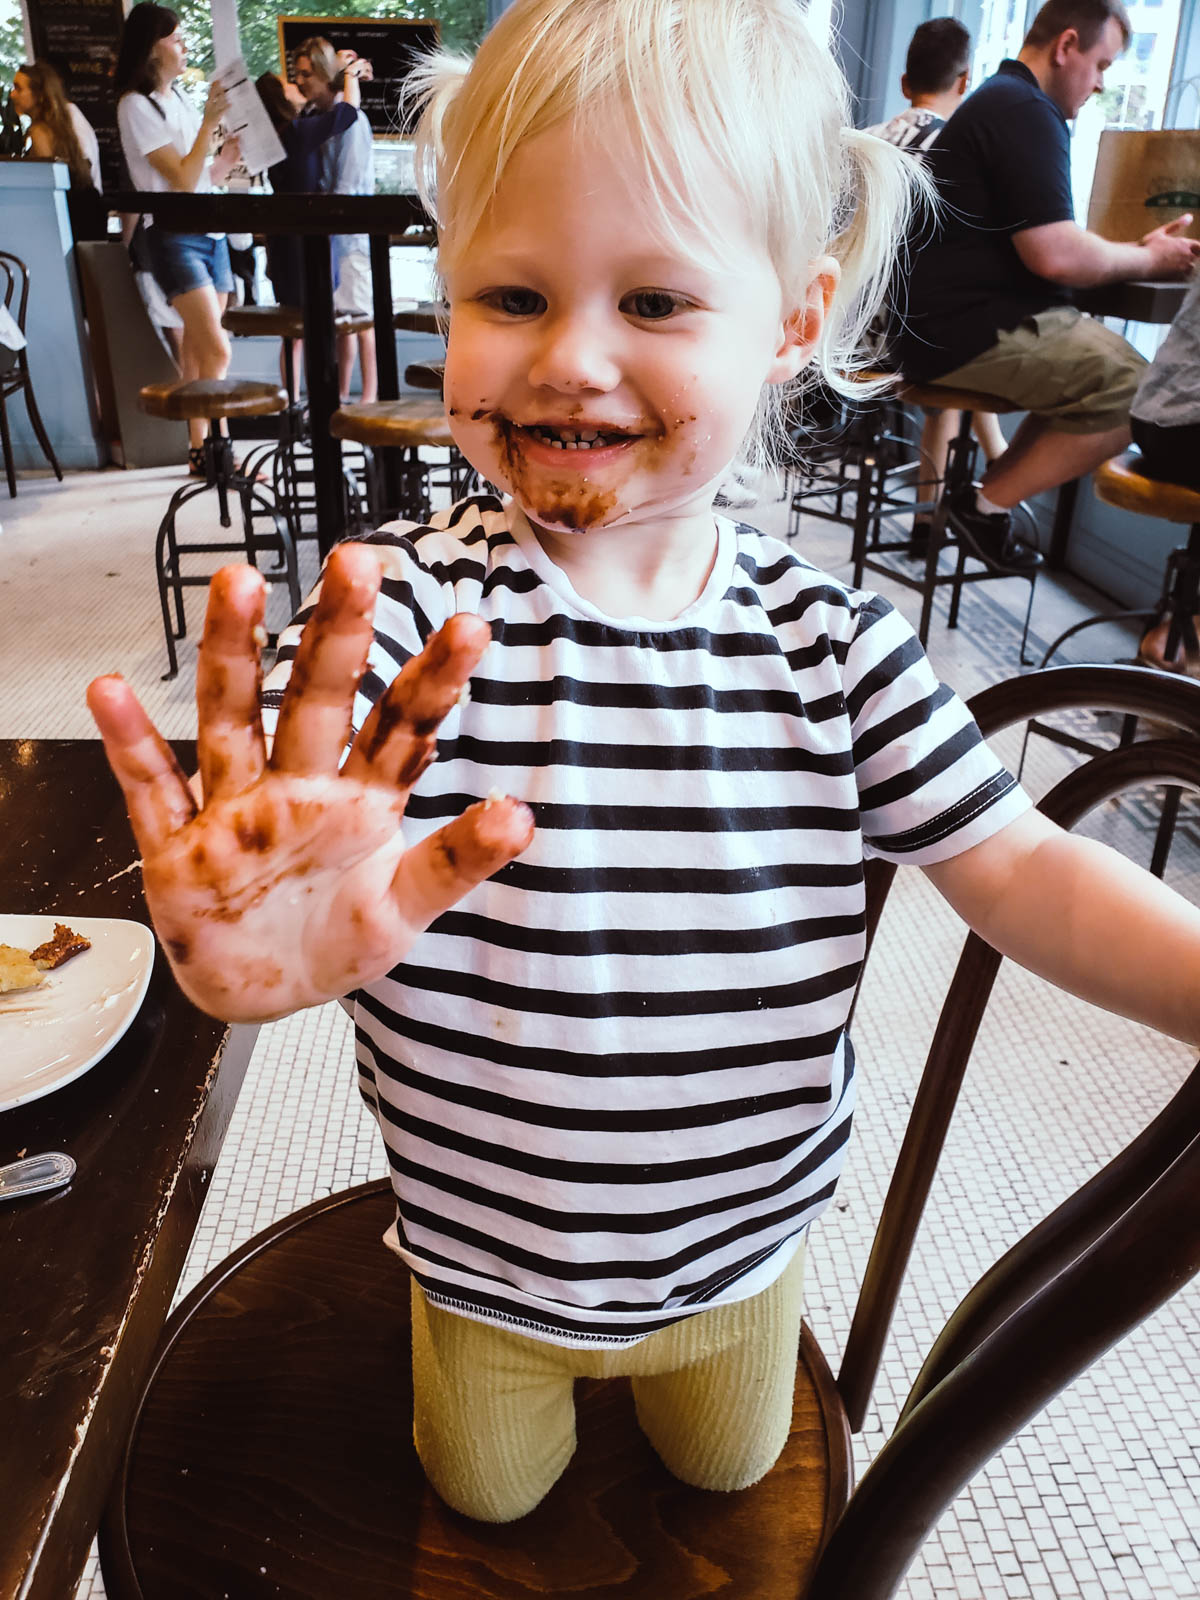 Toddler covered in chocolate